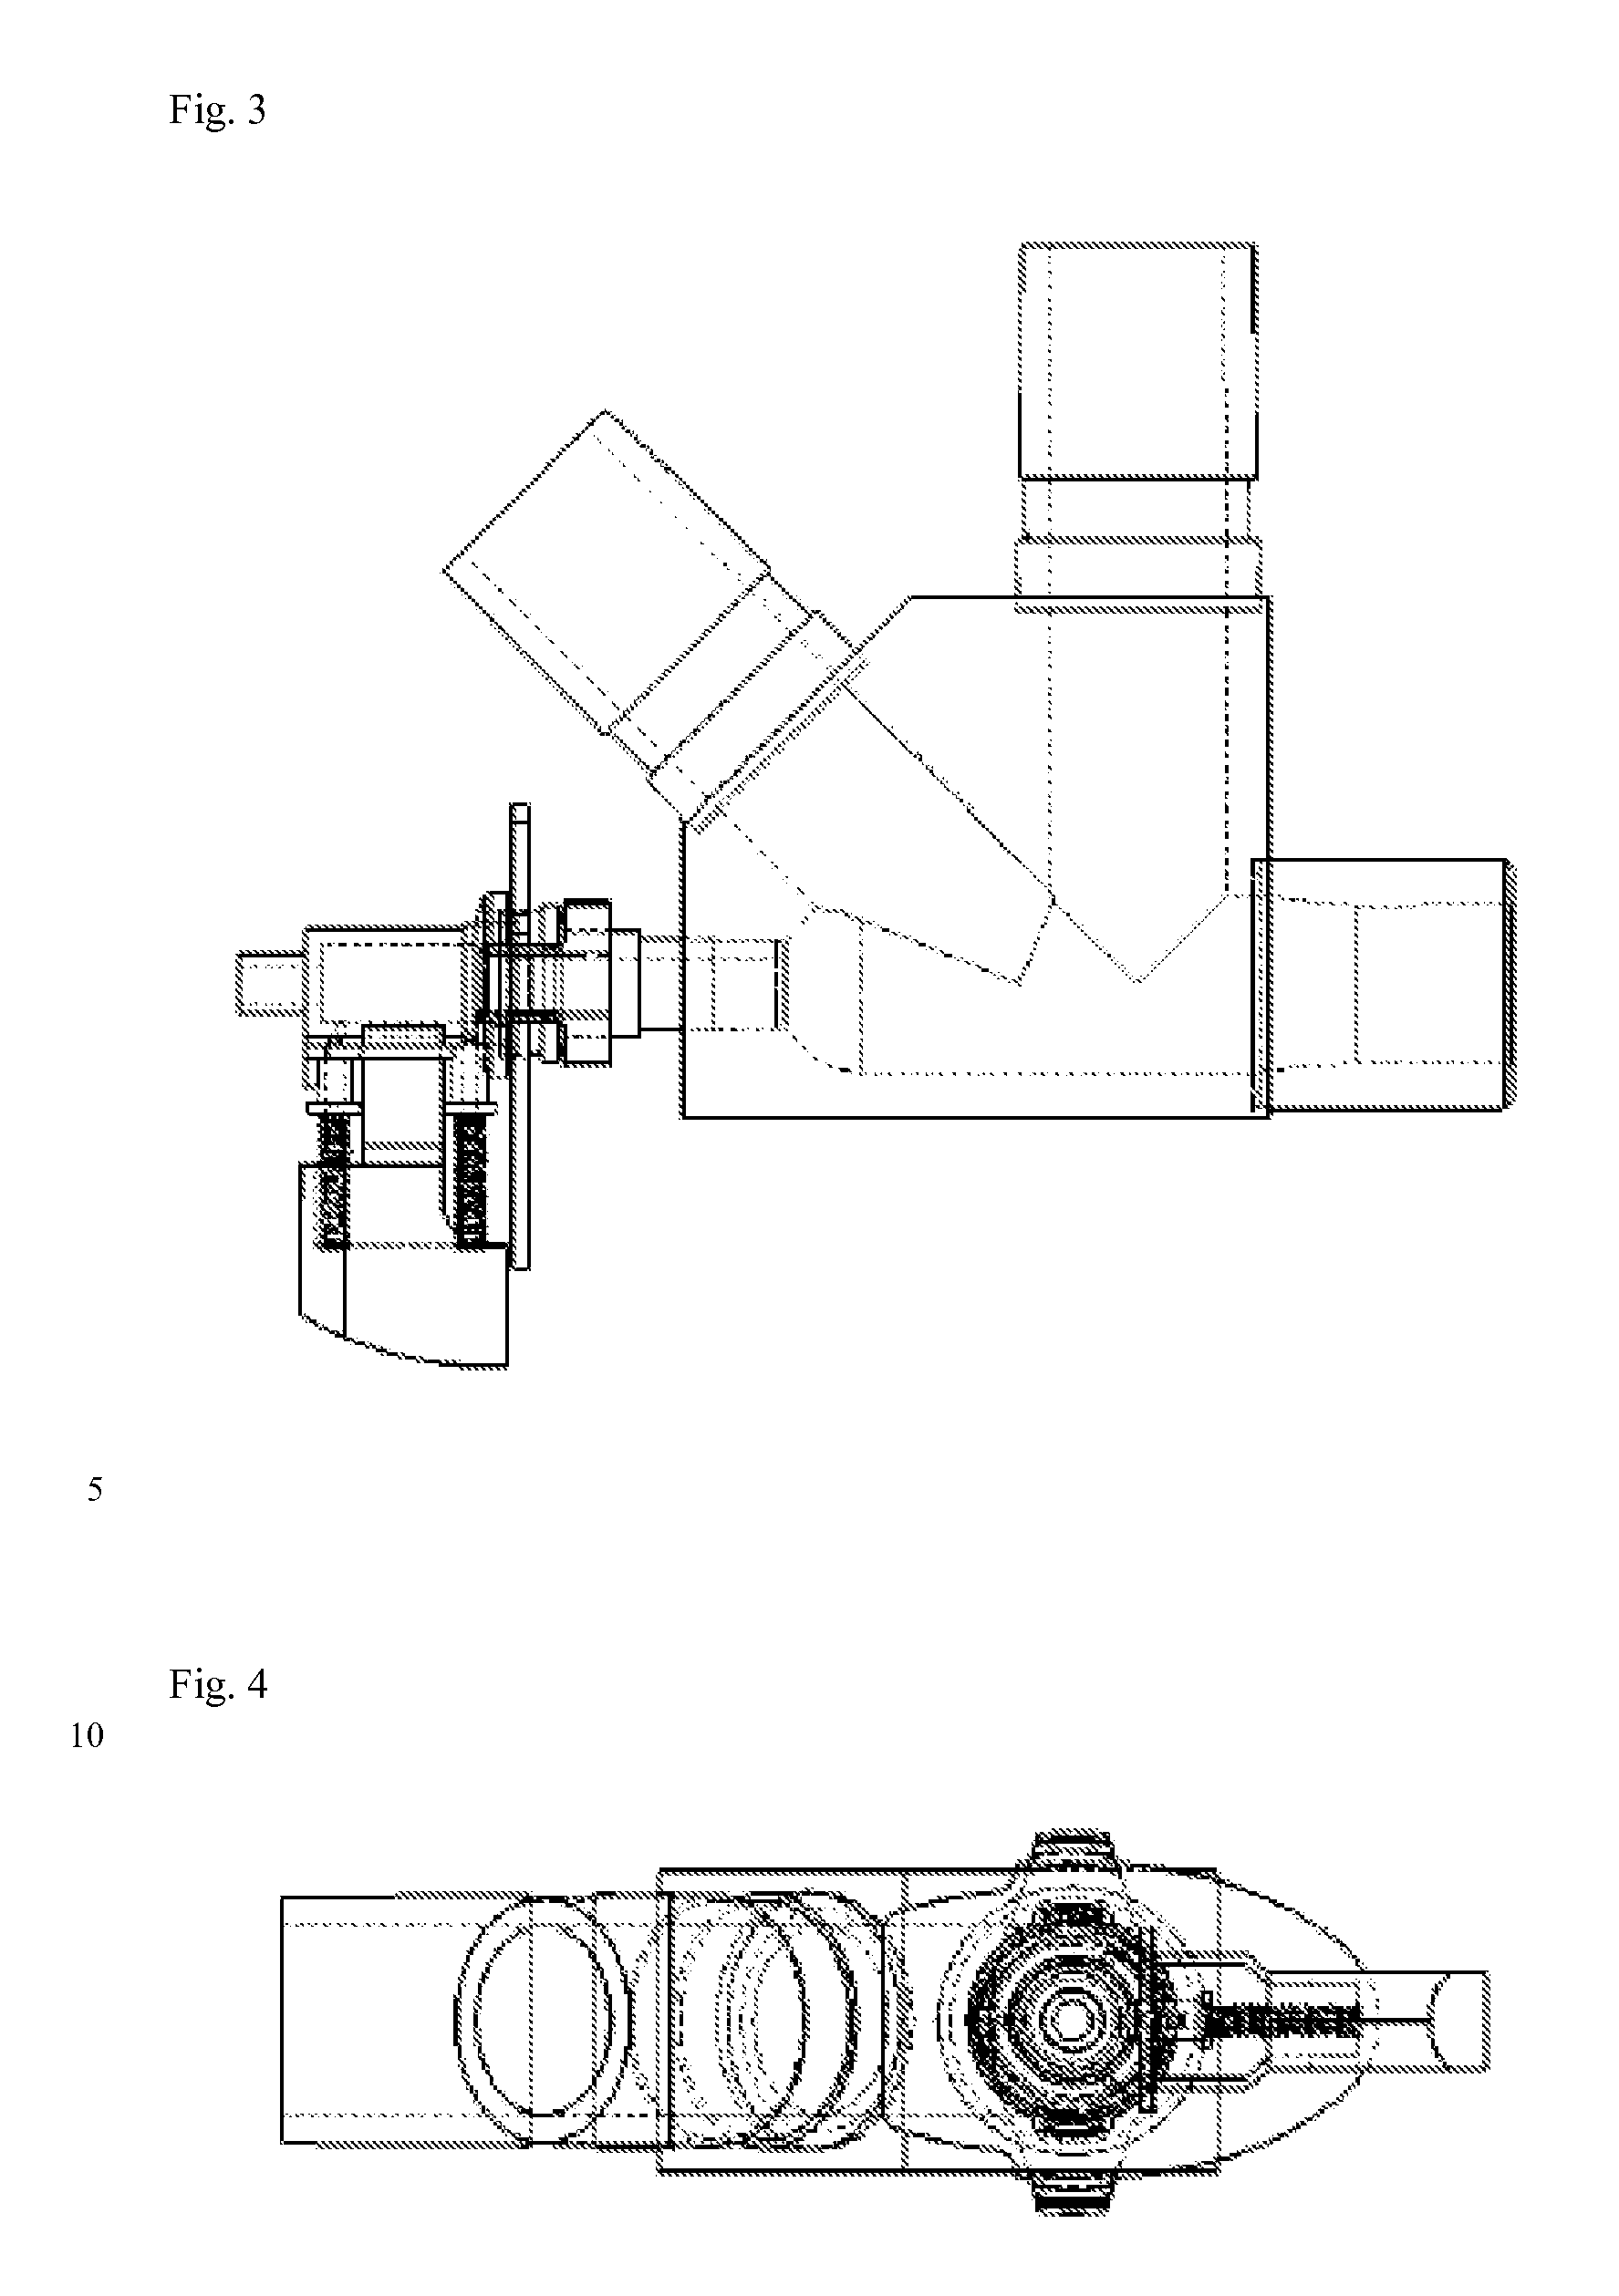 Adapter for inhalation appliances for treatment of artificially ventilated patients